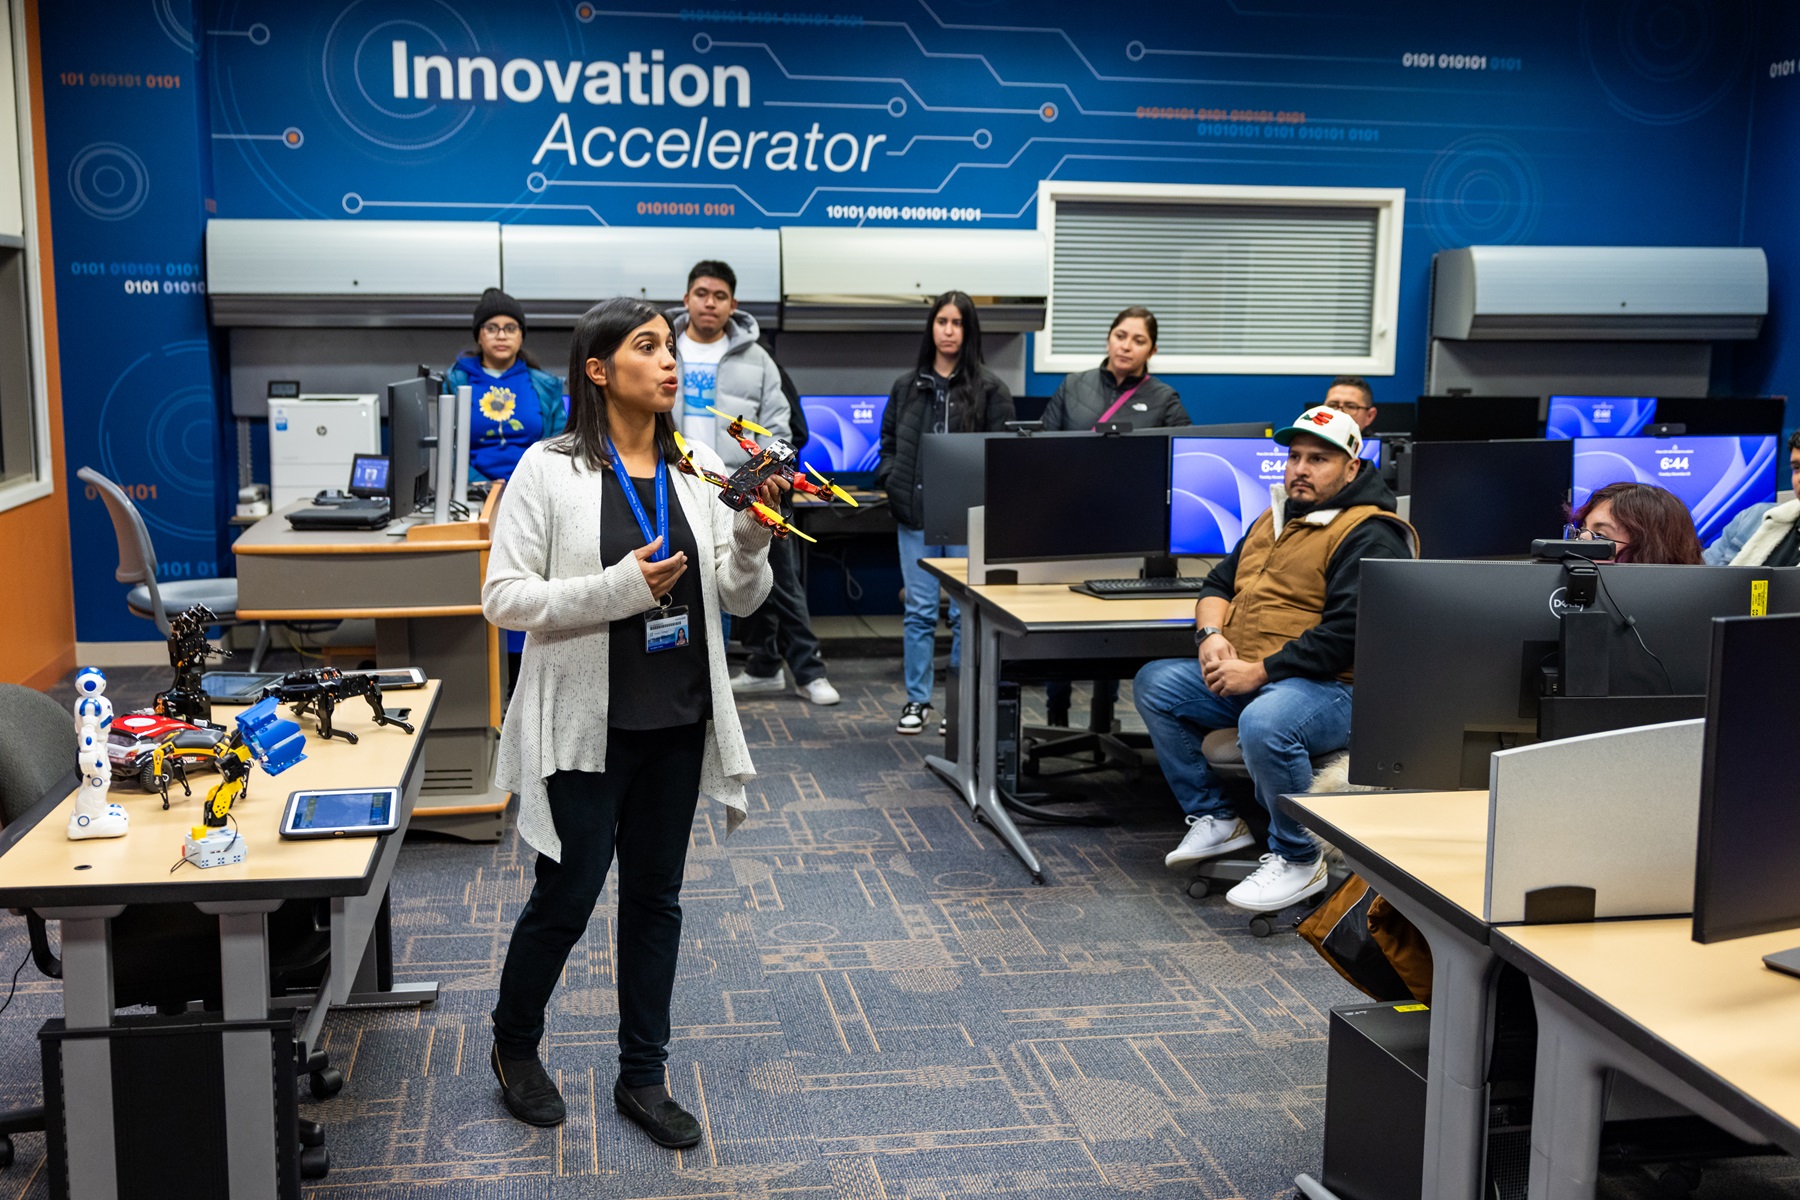 Instructor Annabel Hasty gives an AI presentation in the Innovation Accelerator Lab at a Harper College open house.